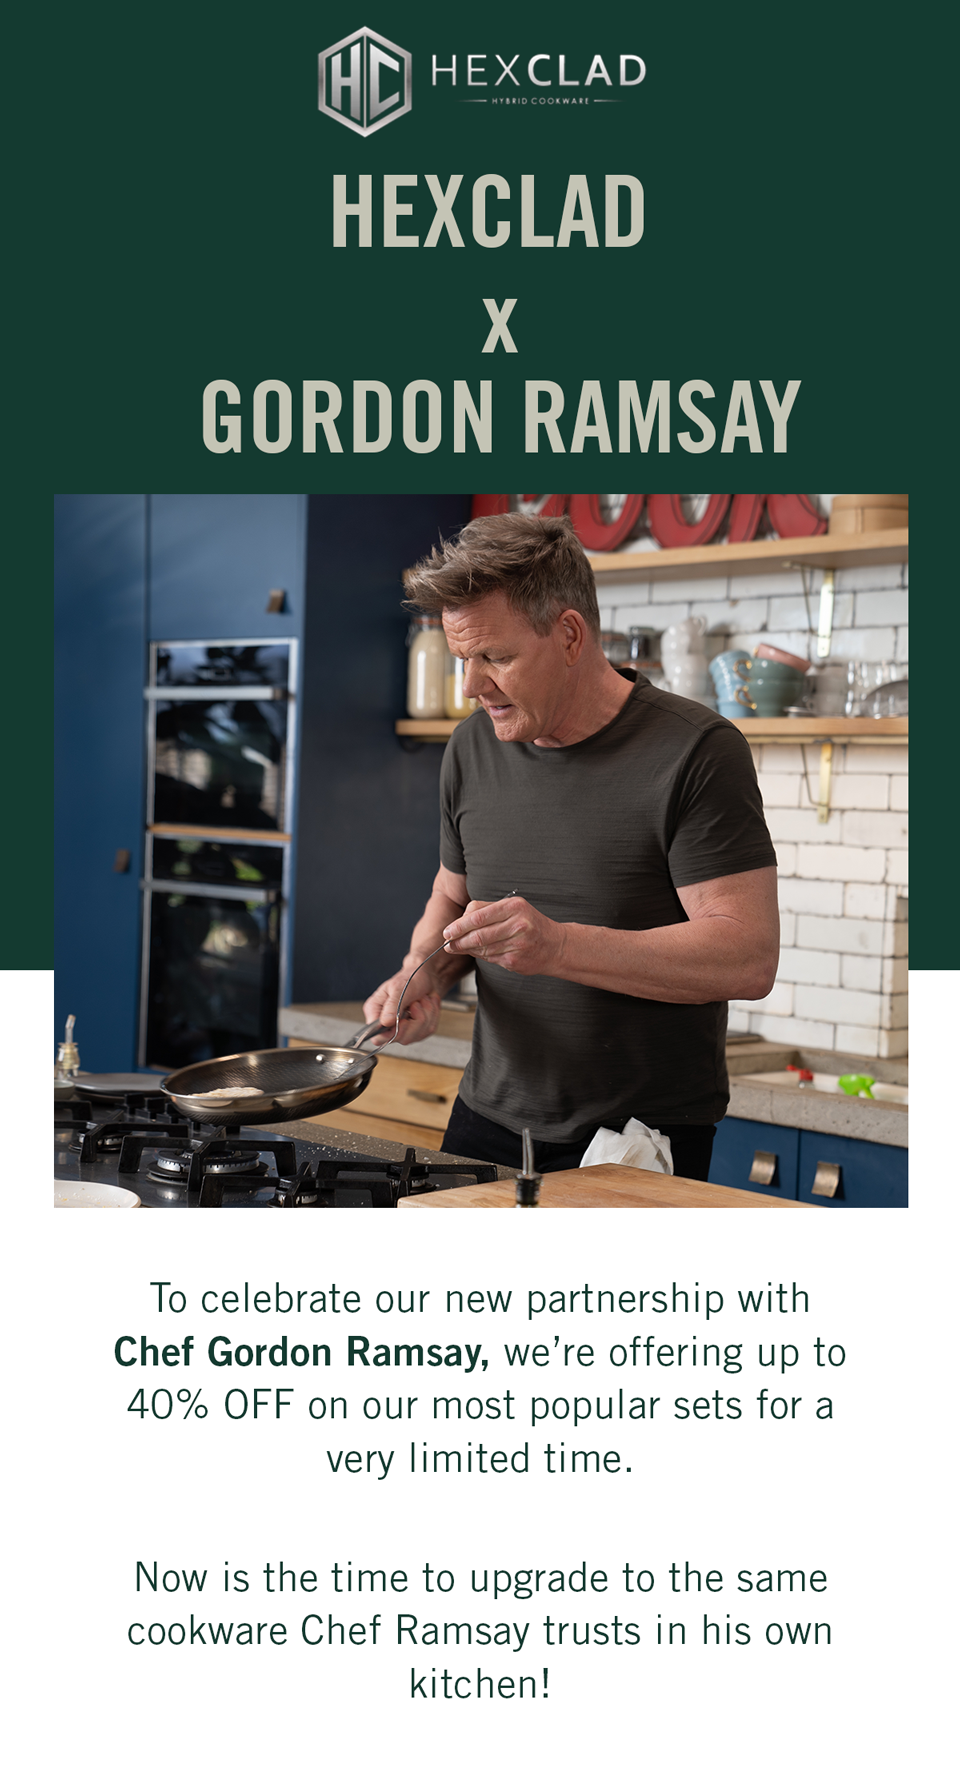 Hexclad, the cookware endorsed by chef Gordon Ramsay. Hexclad offers s, Cookware